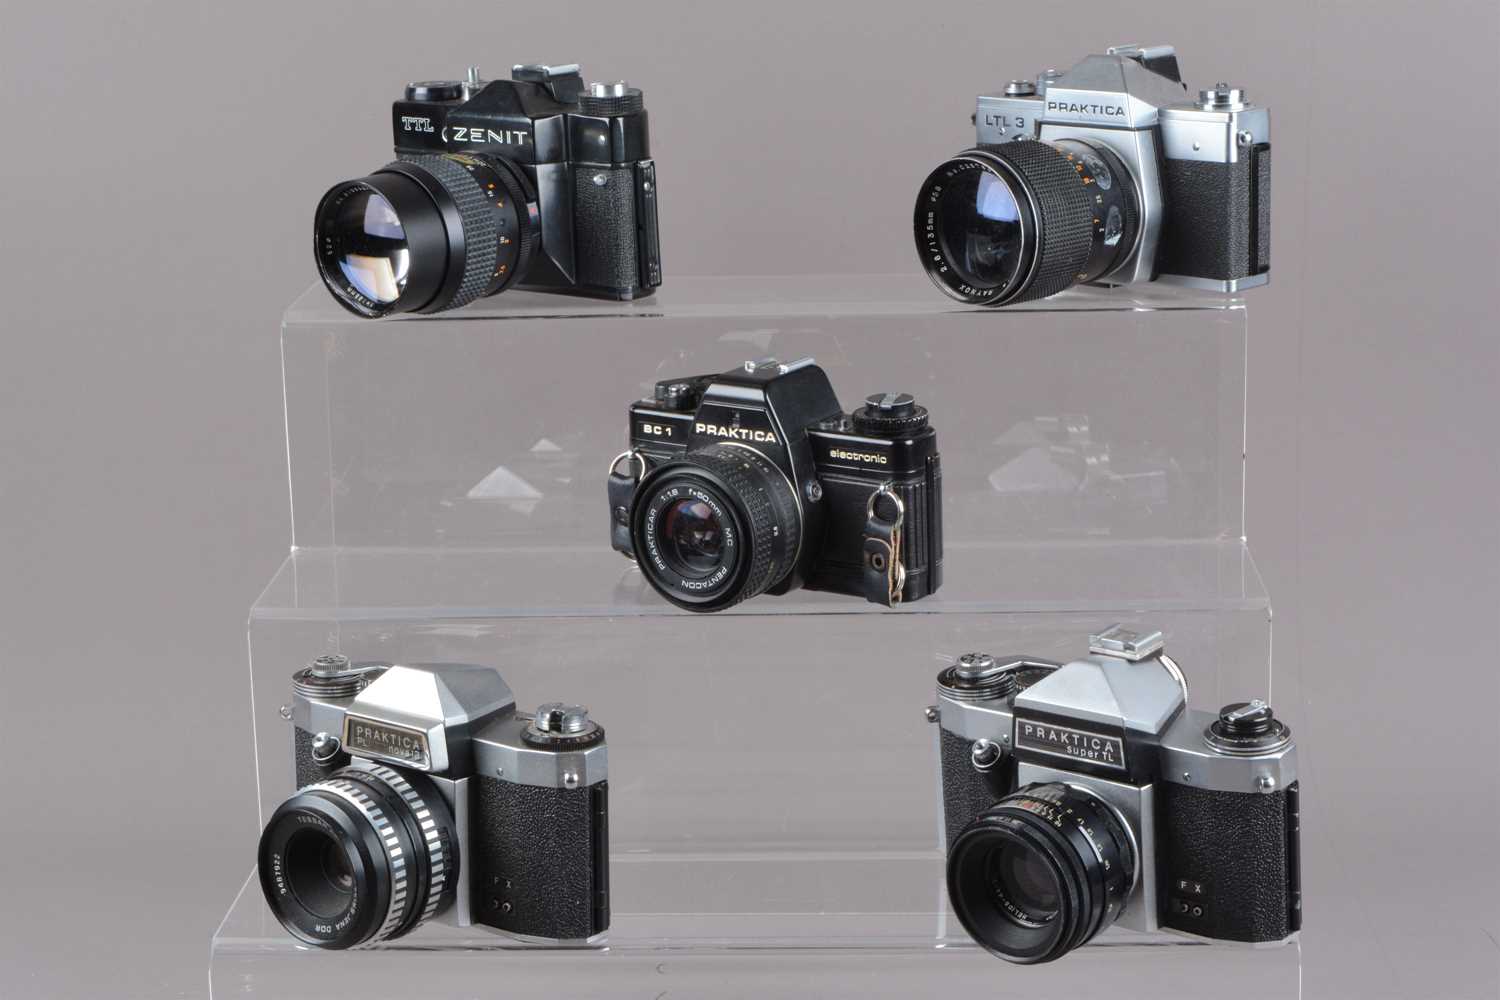 Lot 247 - A Group of Eastern Bloc Cameras